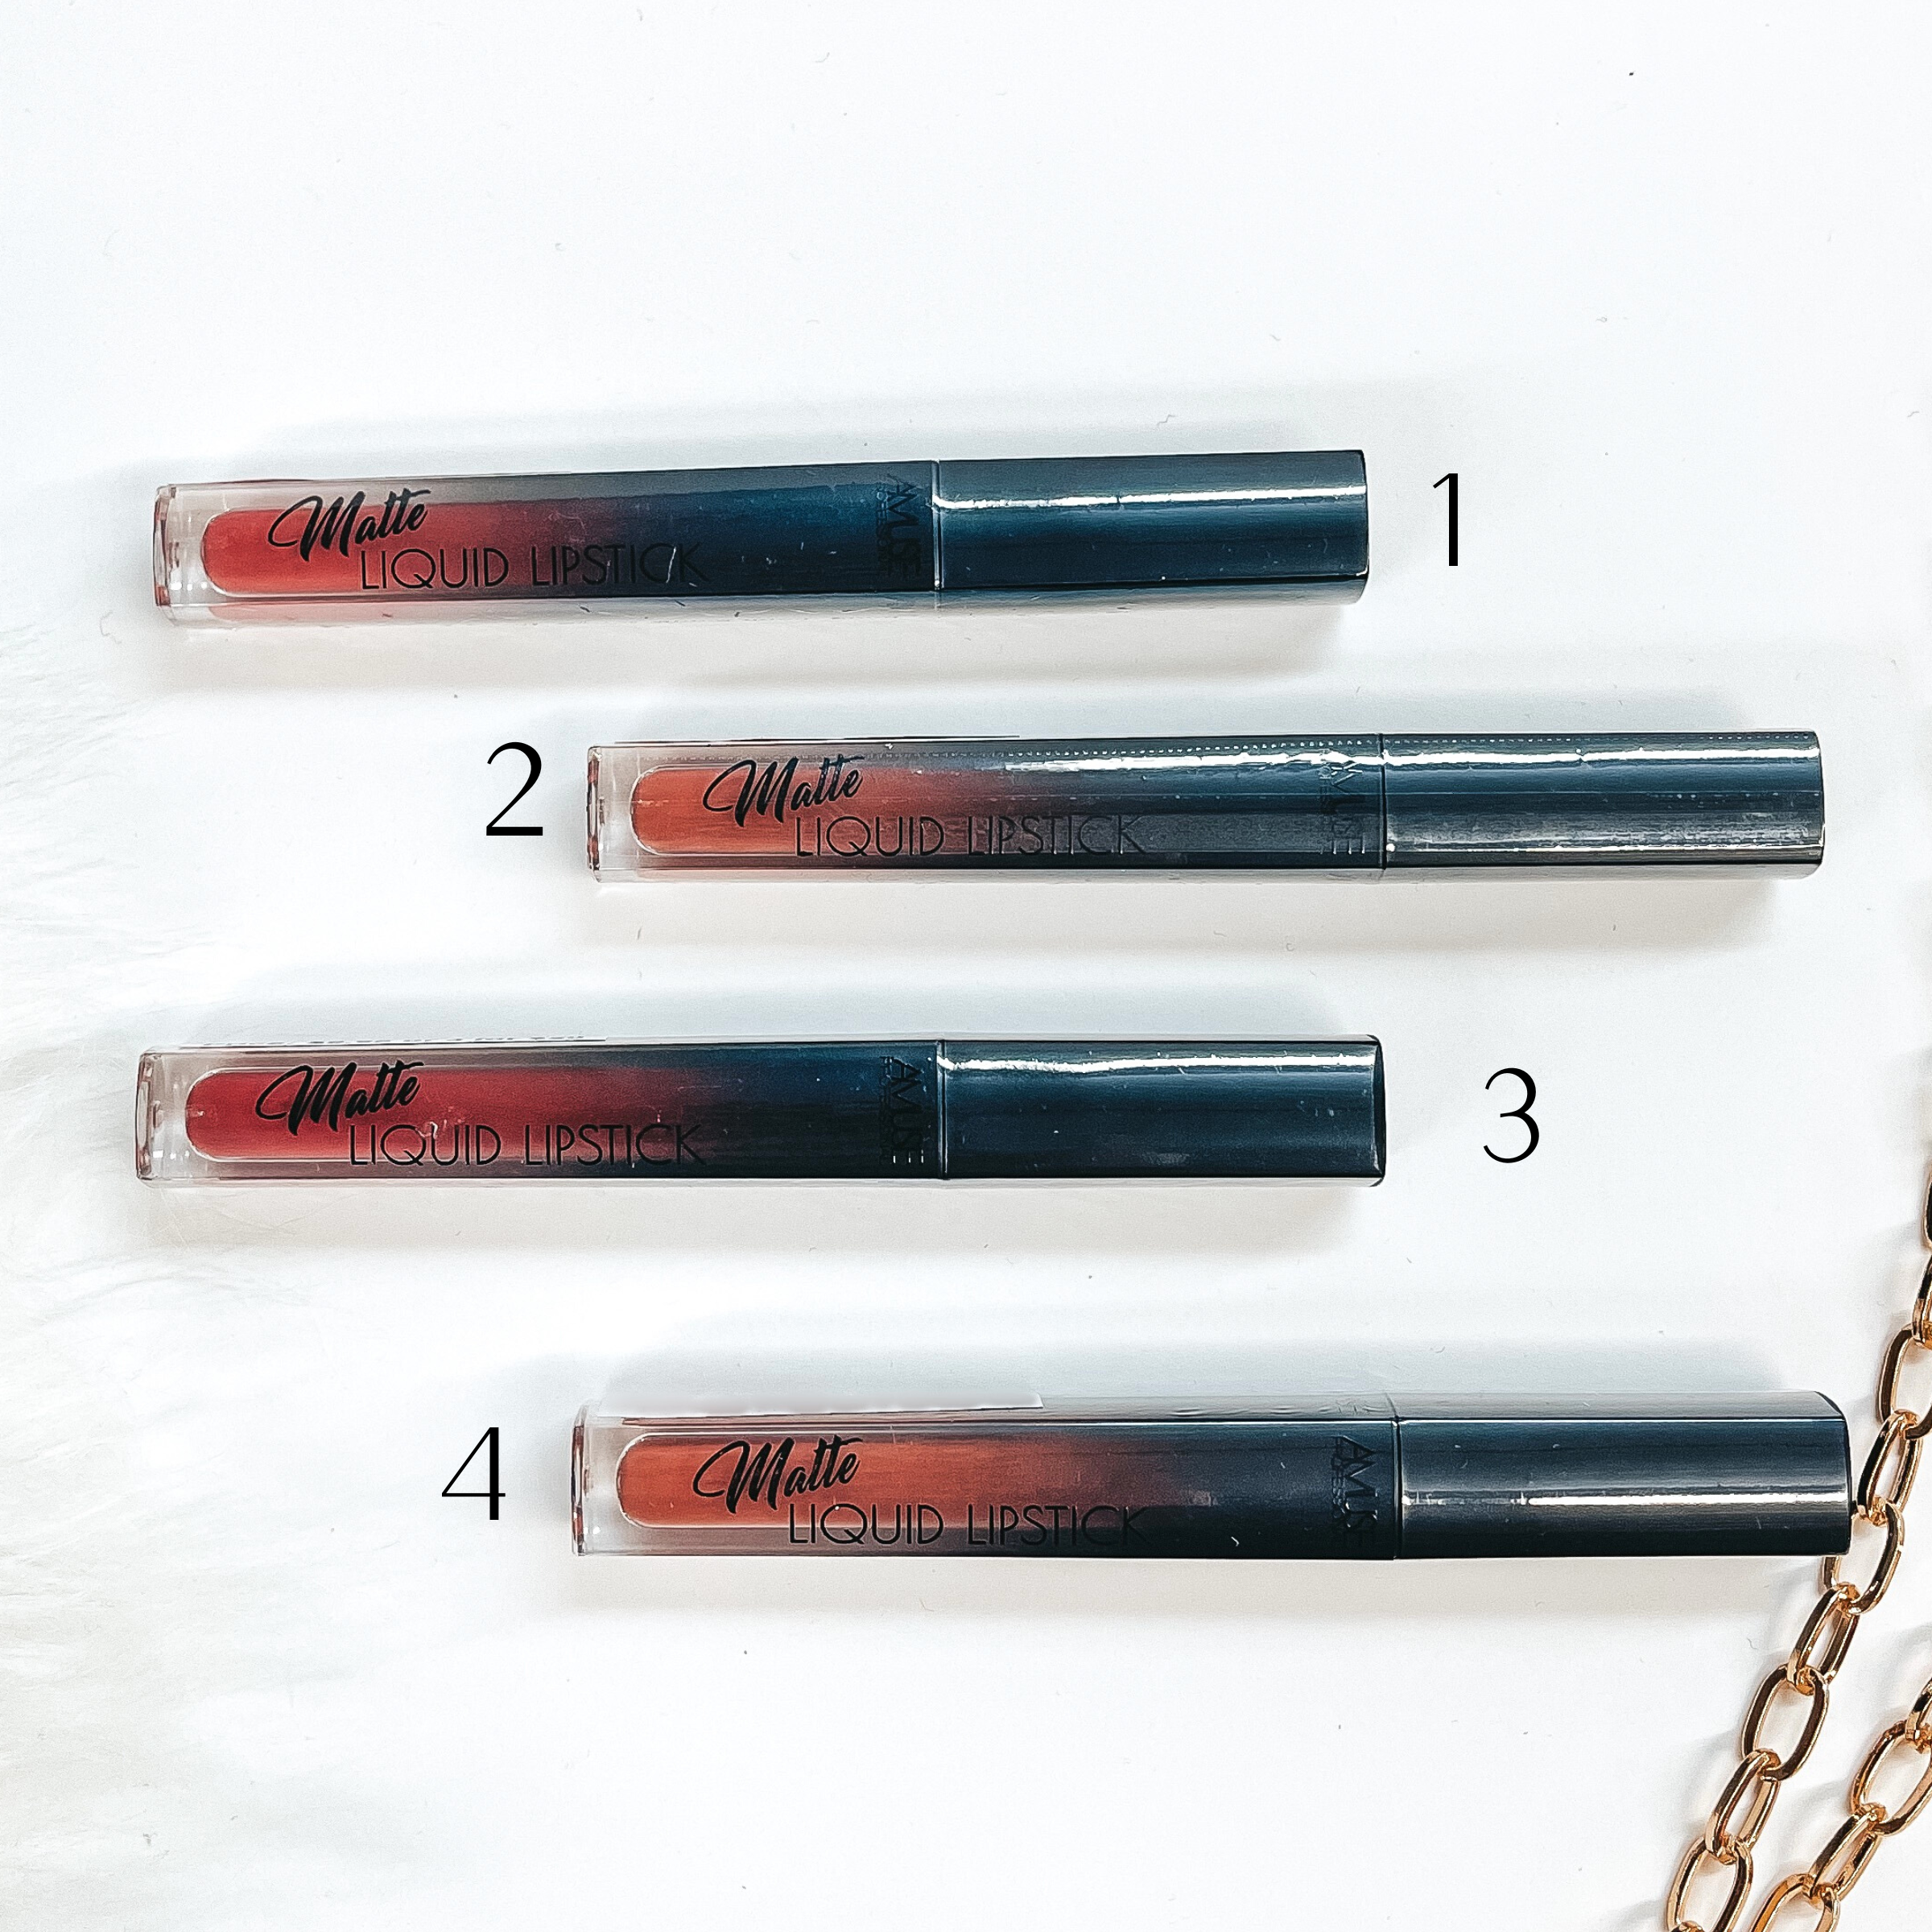 There are four liquid lipsticks in different shades of pink-nudes laying on a white  background with white fur and a gold link chain in the side as decor.